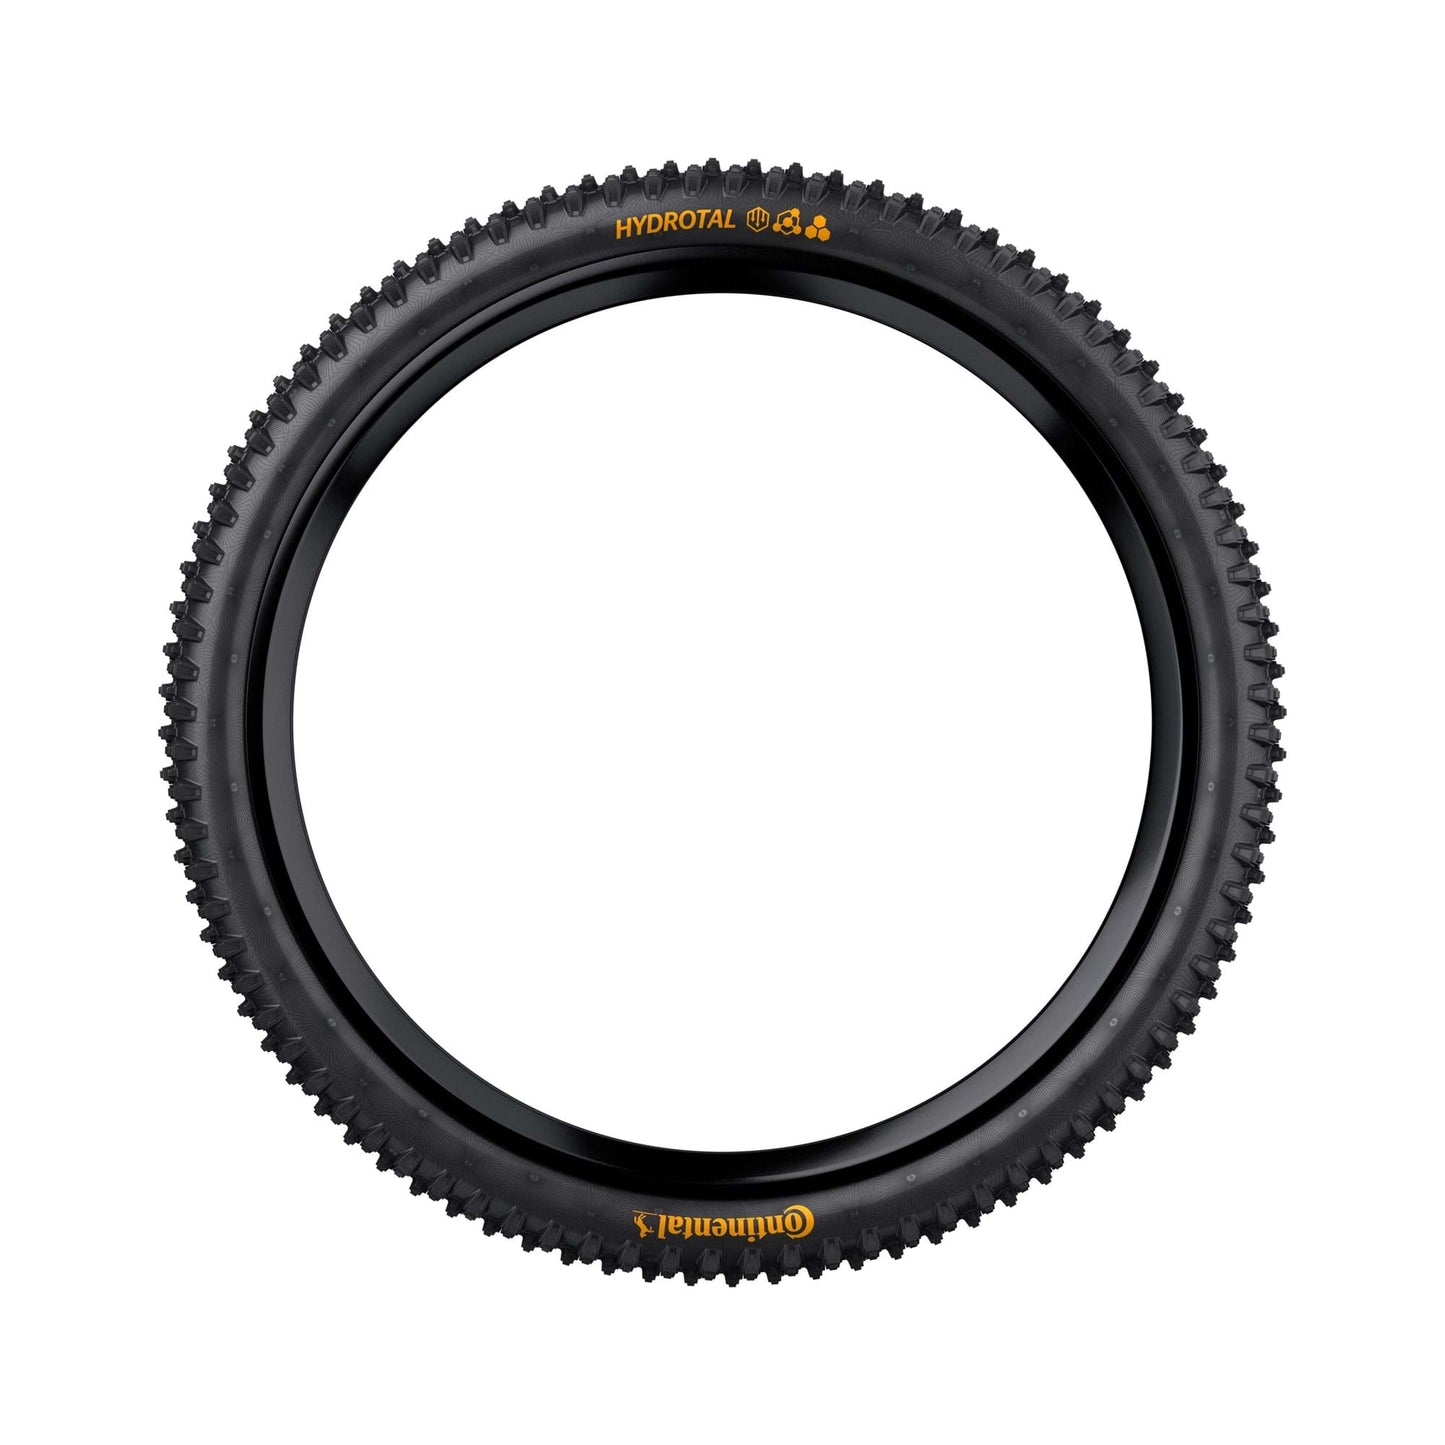 CONTINENTAL HYDROTAL DOWNHILL TYRE - SUPERSOFT COMPOUND FOLDABLE - 29X2.40"